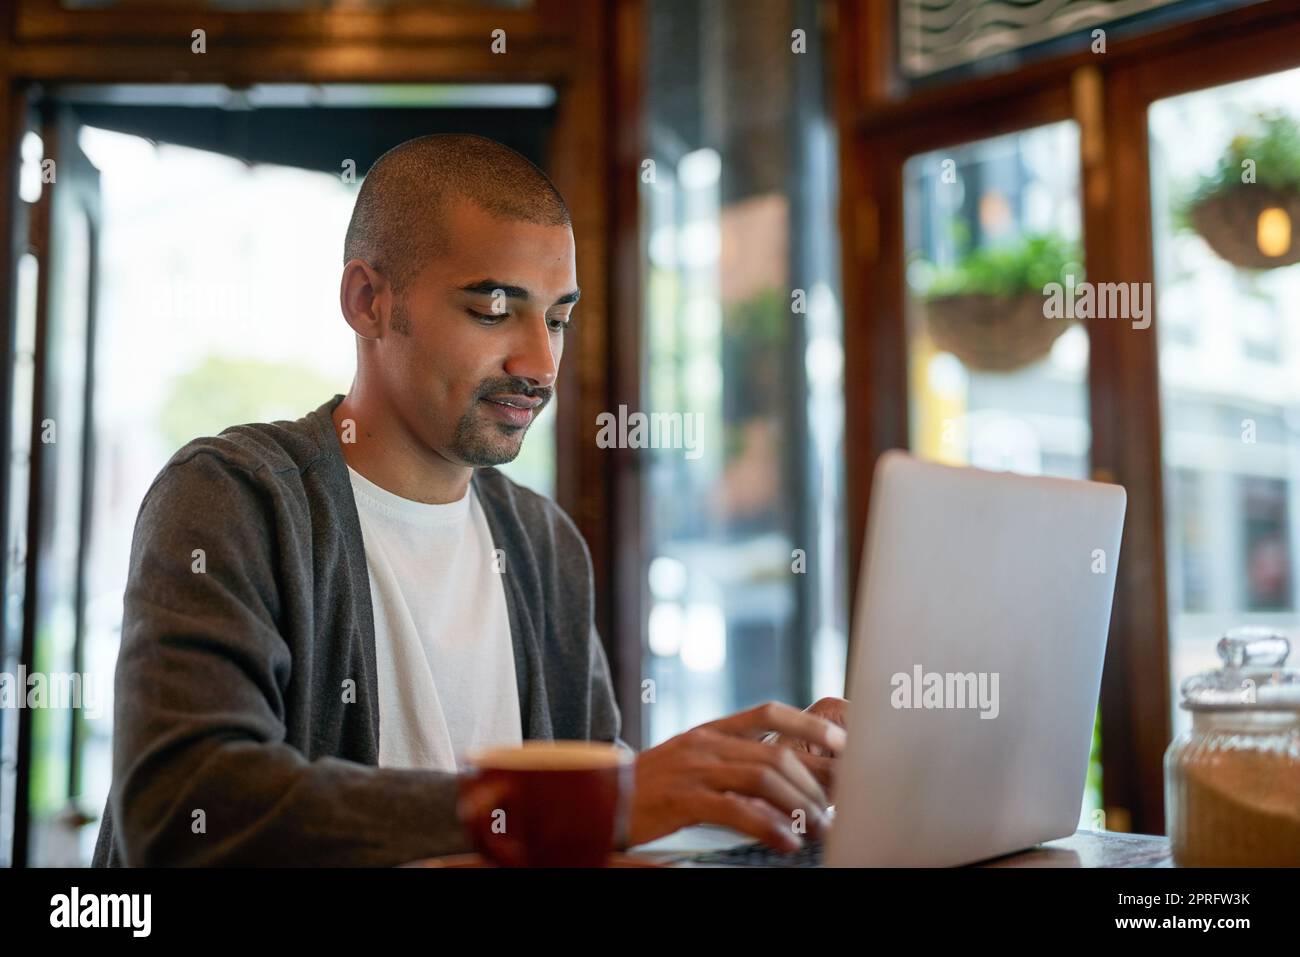 This is his perfect working environment to stay productive. a young man working on his laptop in a cafe. Stock Photo